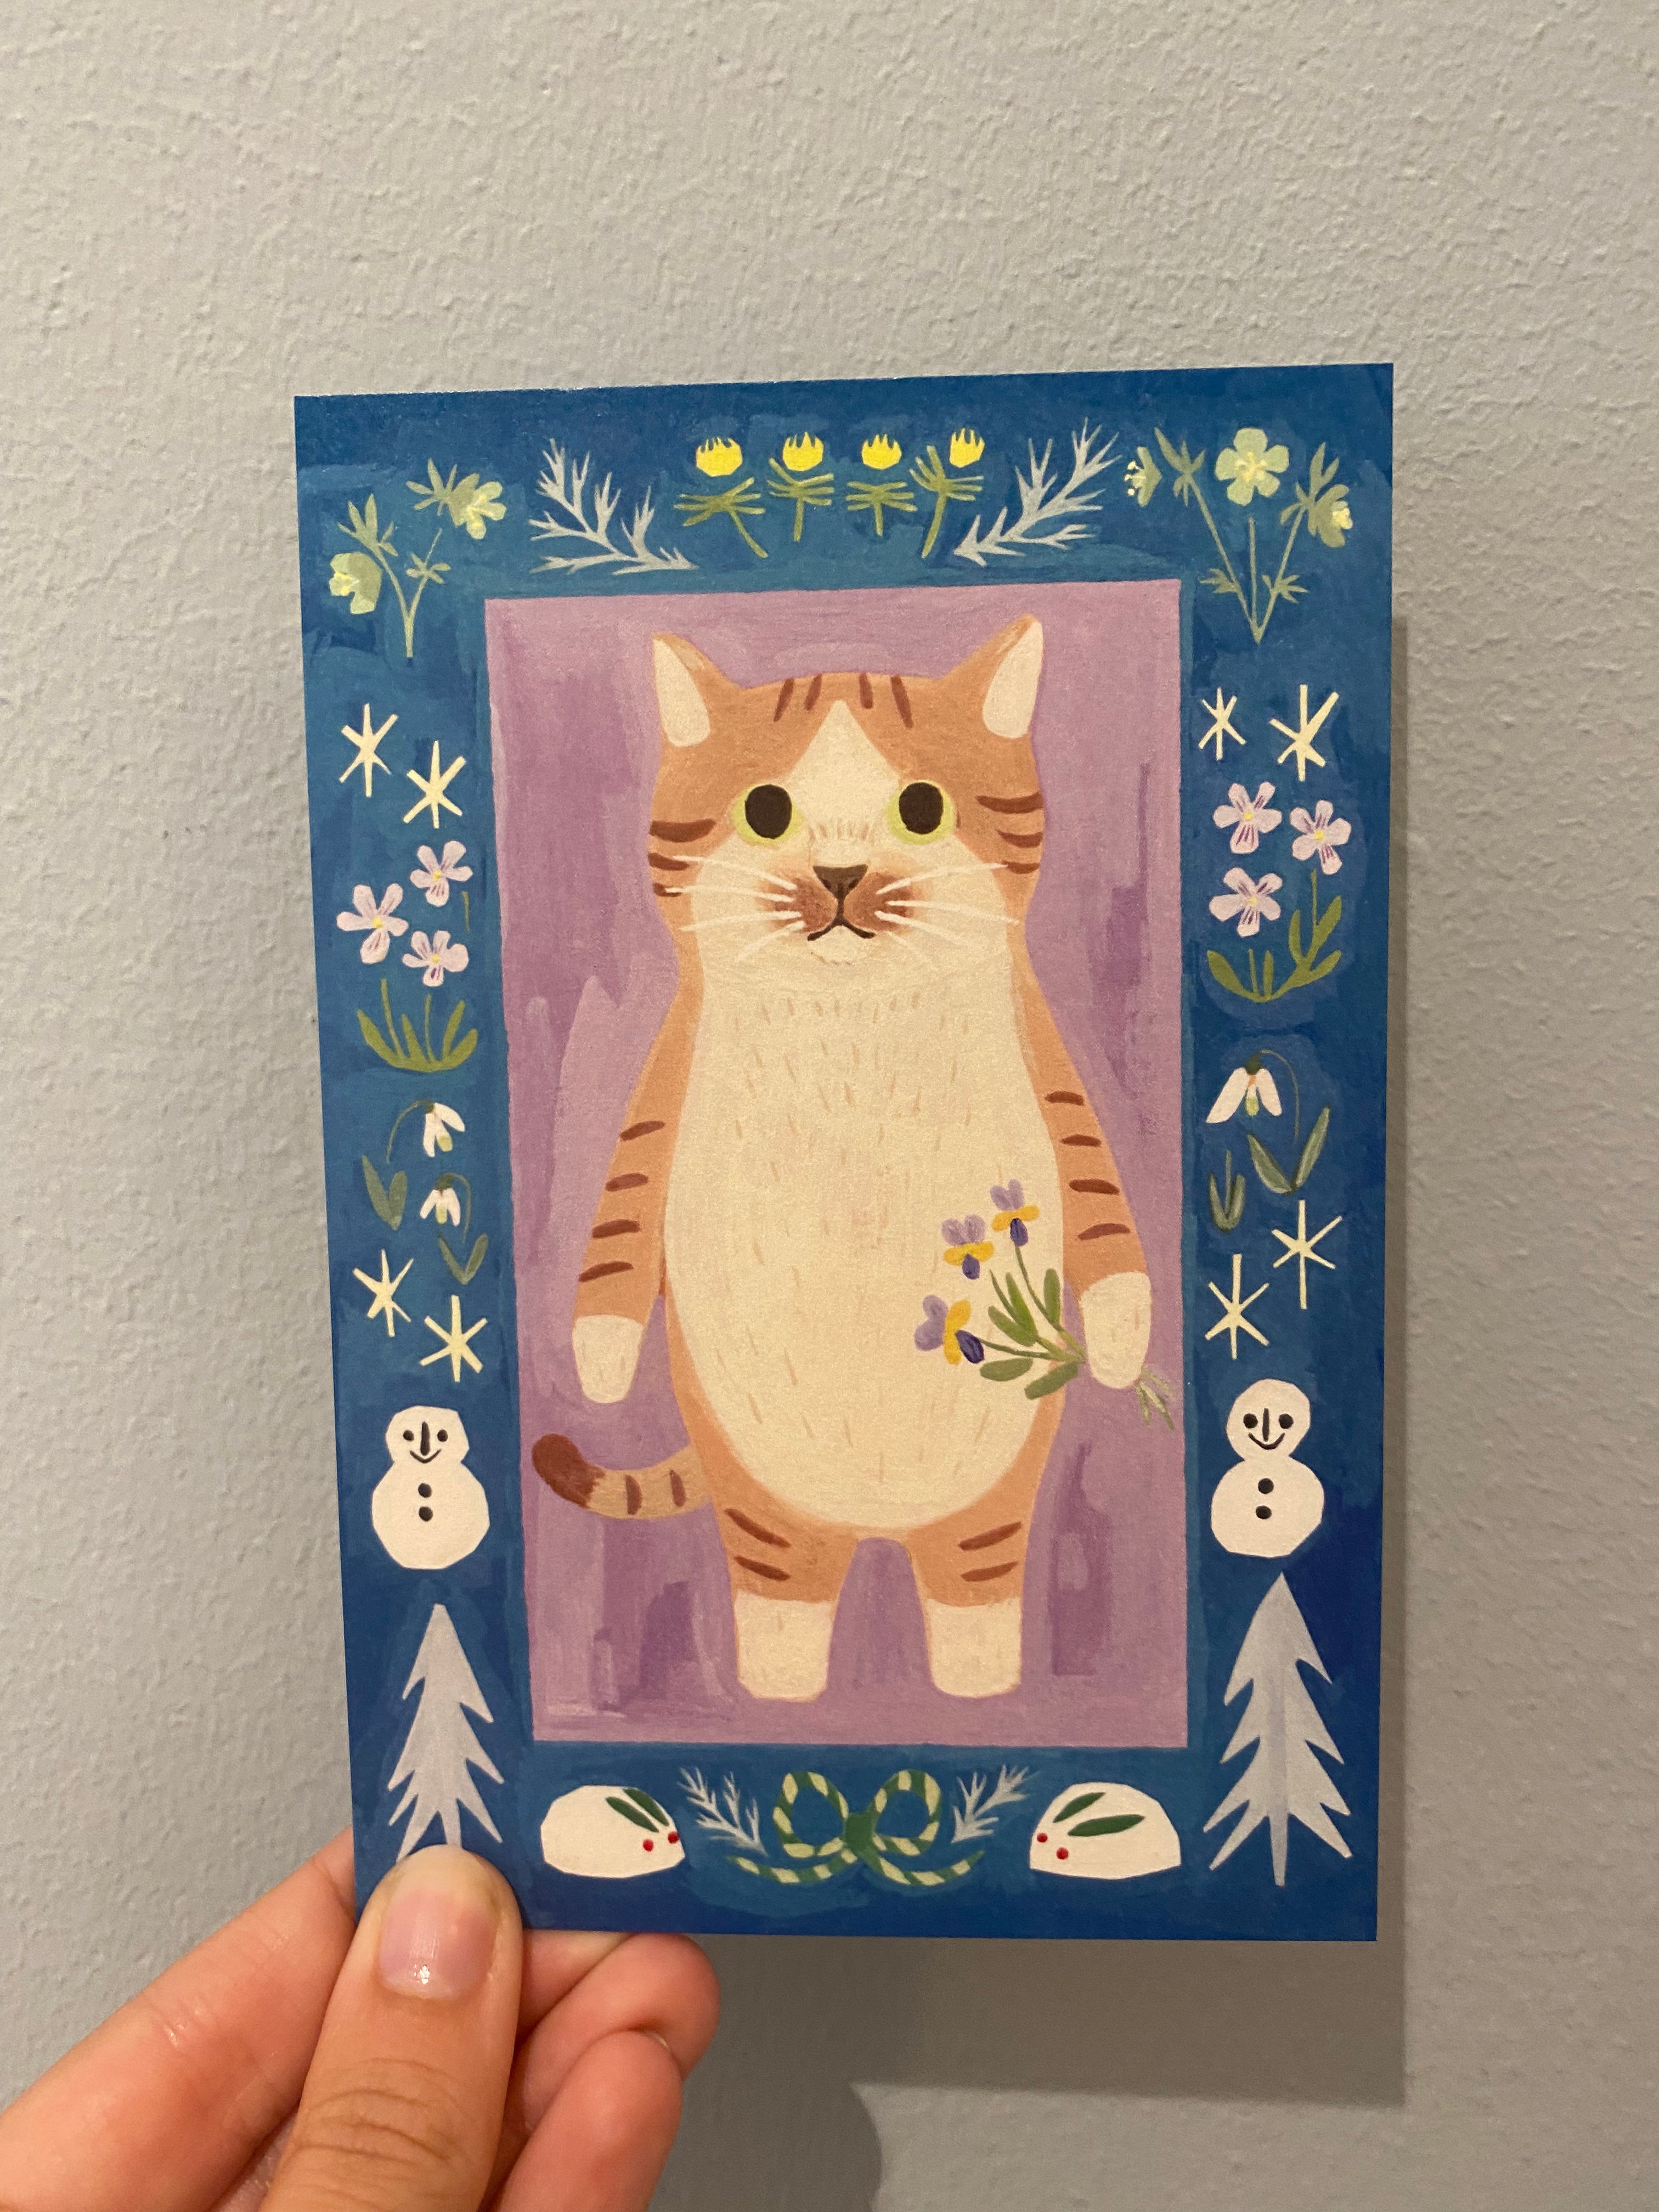 Japanese card blue background with motif of cat holding purple flowers